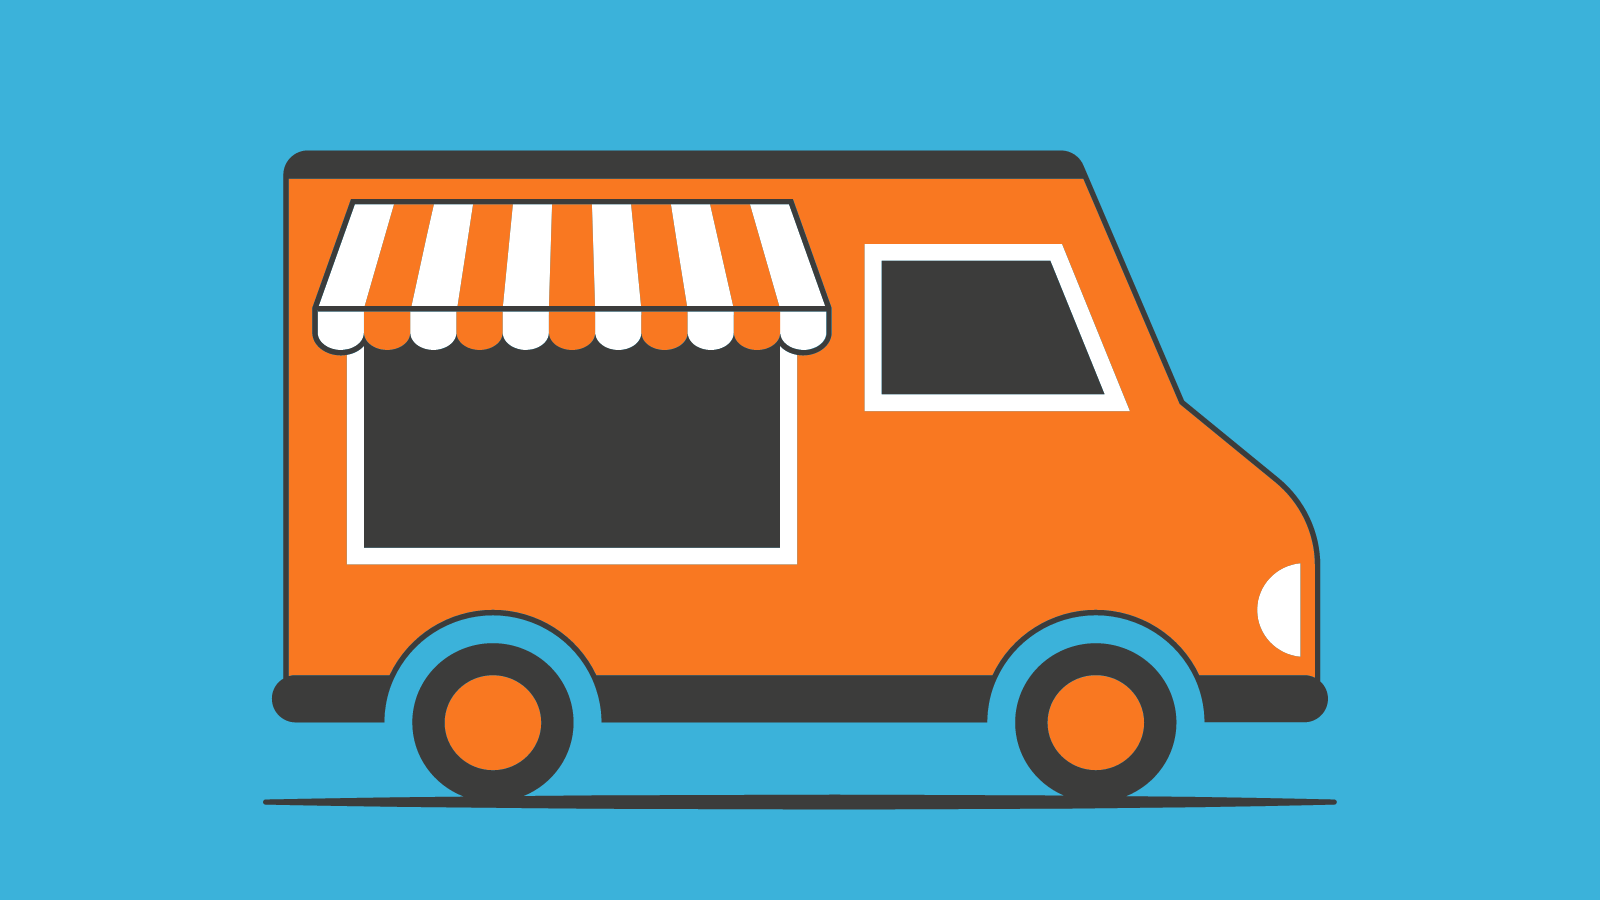 An orange food truck with an awning